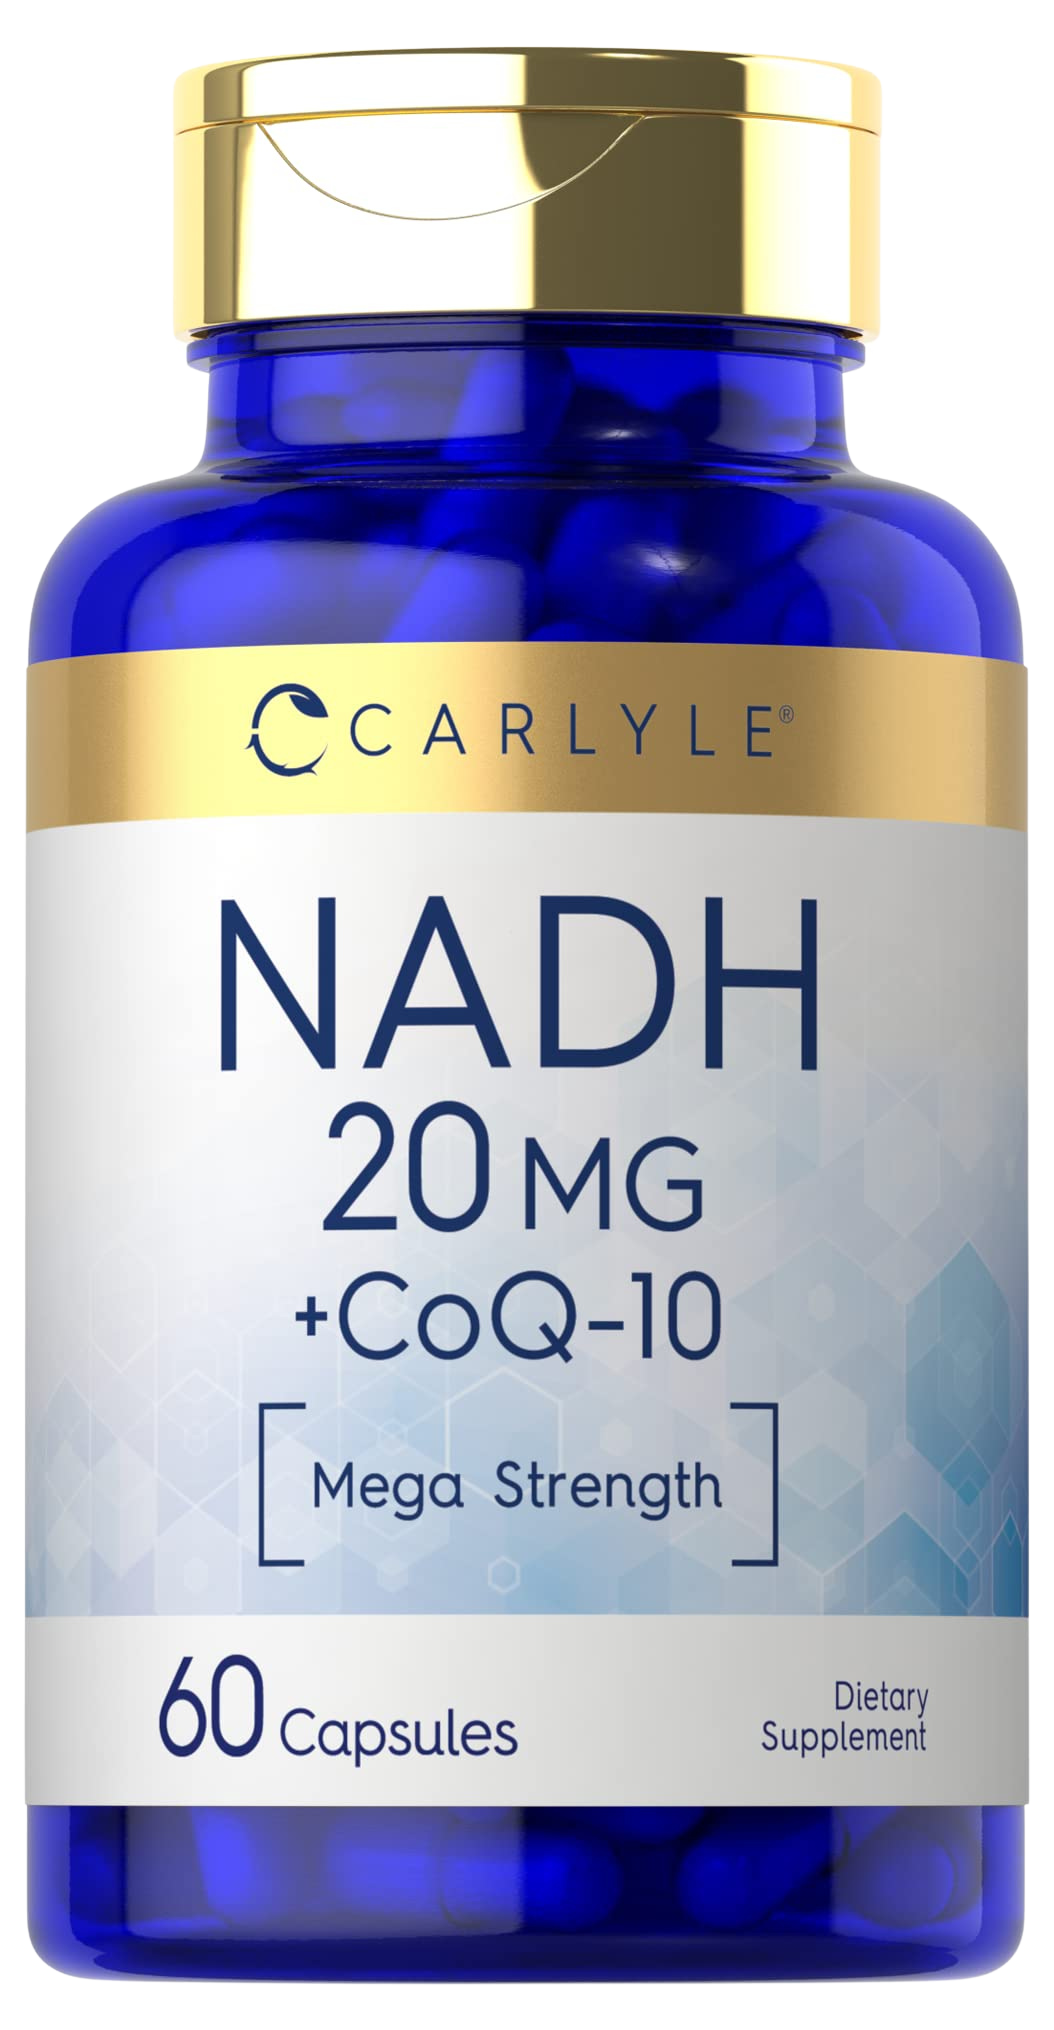 Carlyle NADH Supplement 20mg | with CoQ10 | 60 Capsules | Mega Strength | Non-GMO, Gluten Free